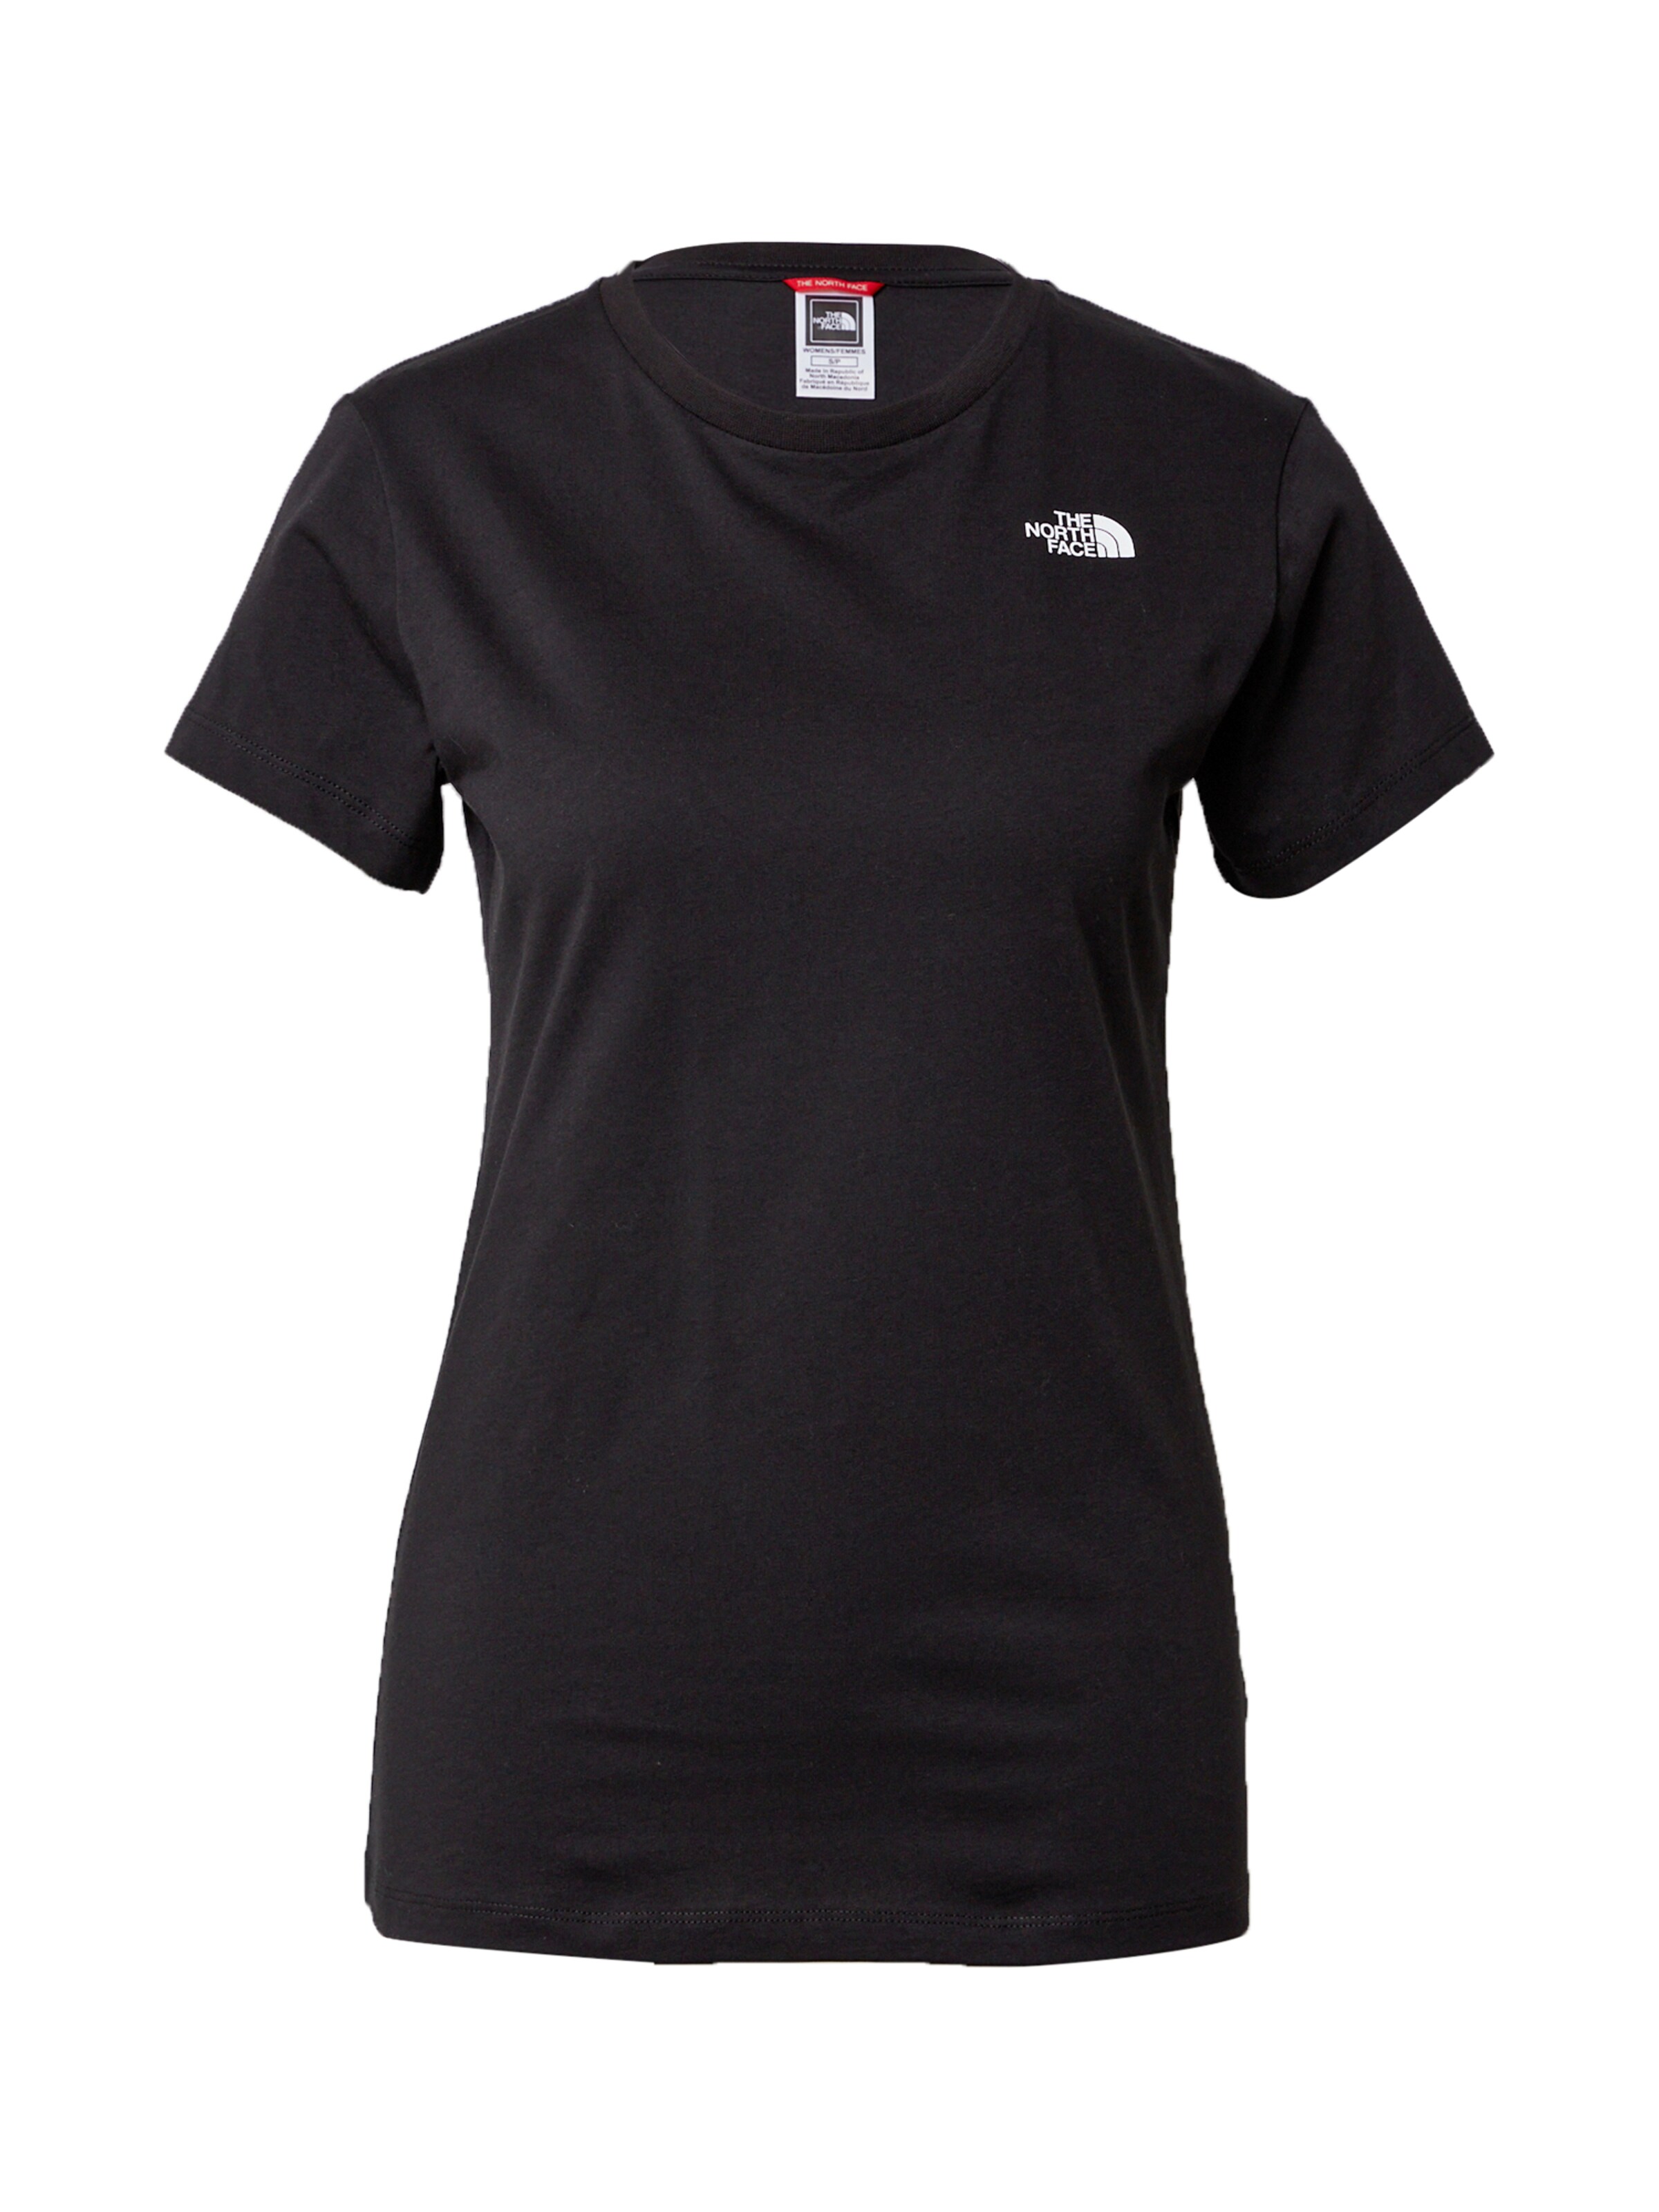 Frauen Shirts & Tops THE NORTH FACE T-Shirt in Schwarz - KY07706